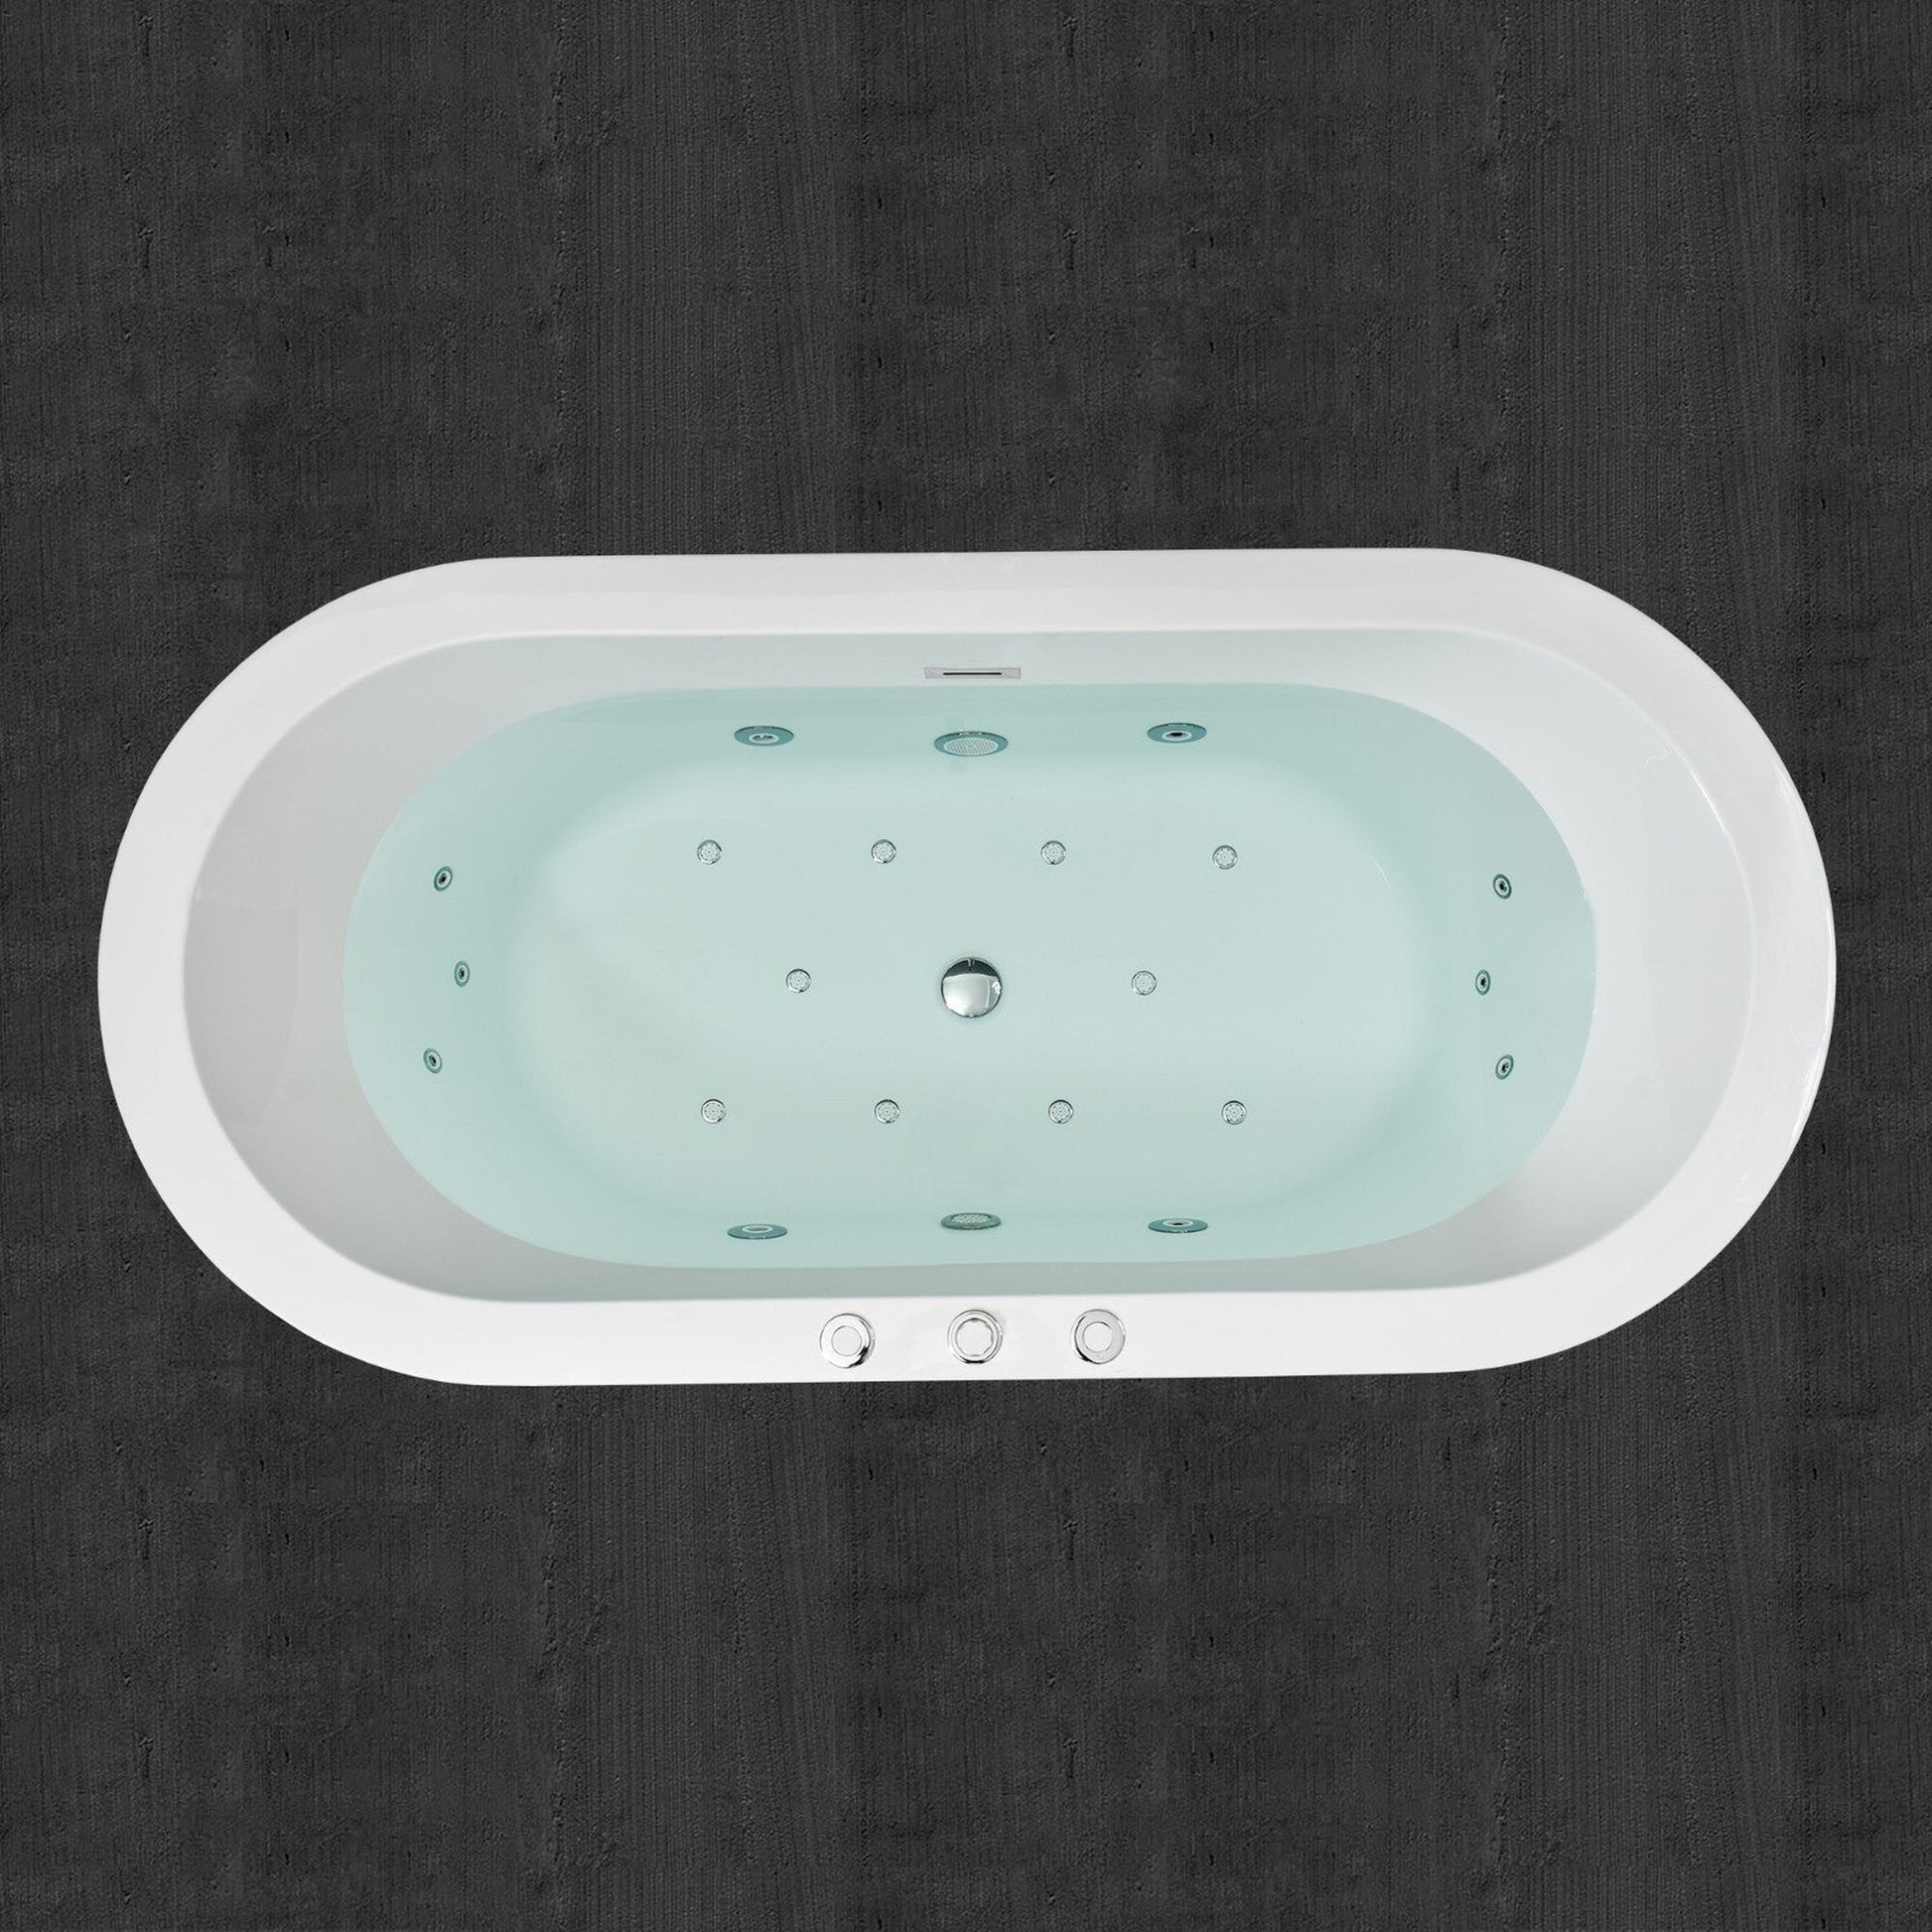 WoodBridge 67" x 32" White Whirlpool Water Jetted and Air Bubble Freestanding Bathtub